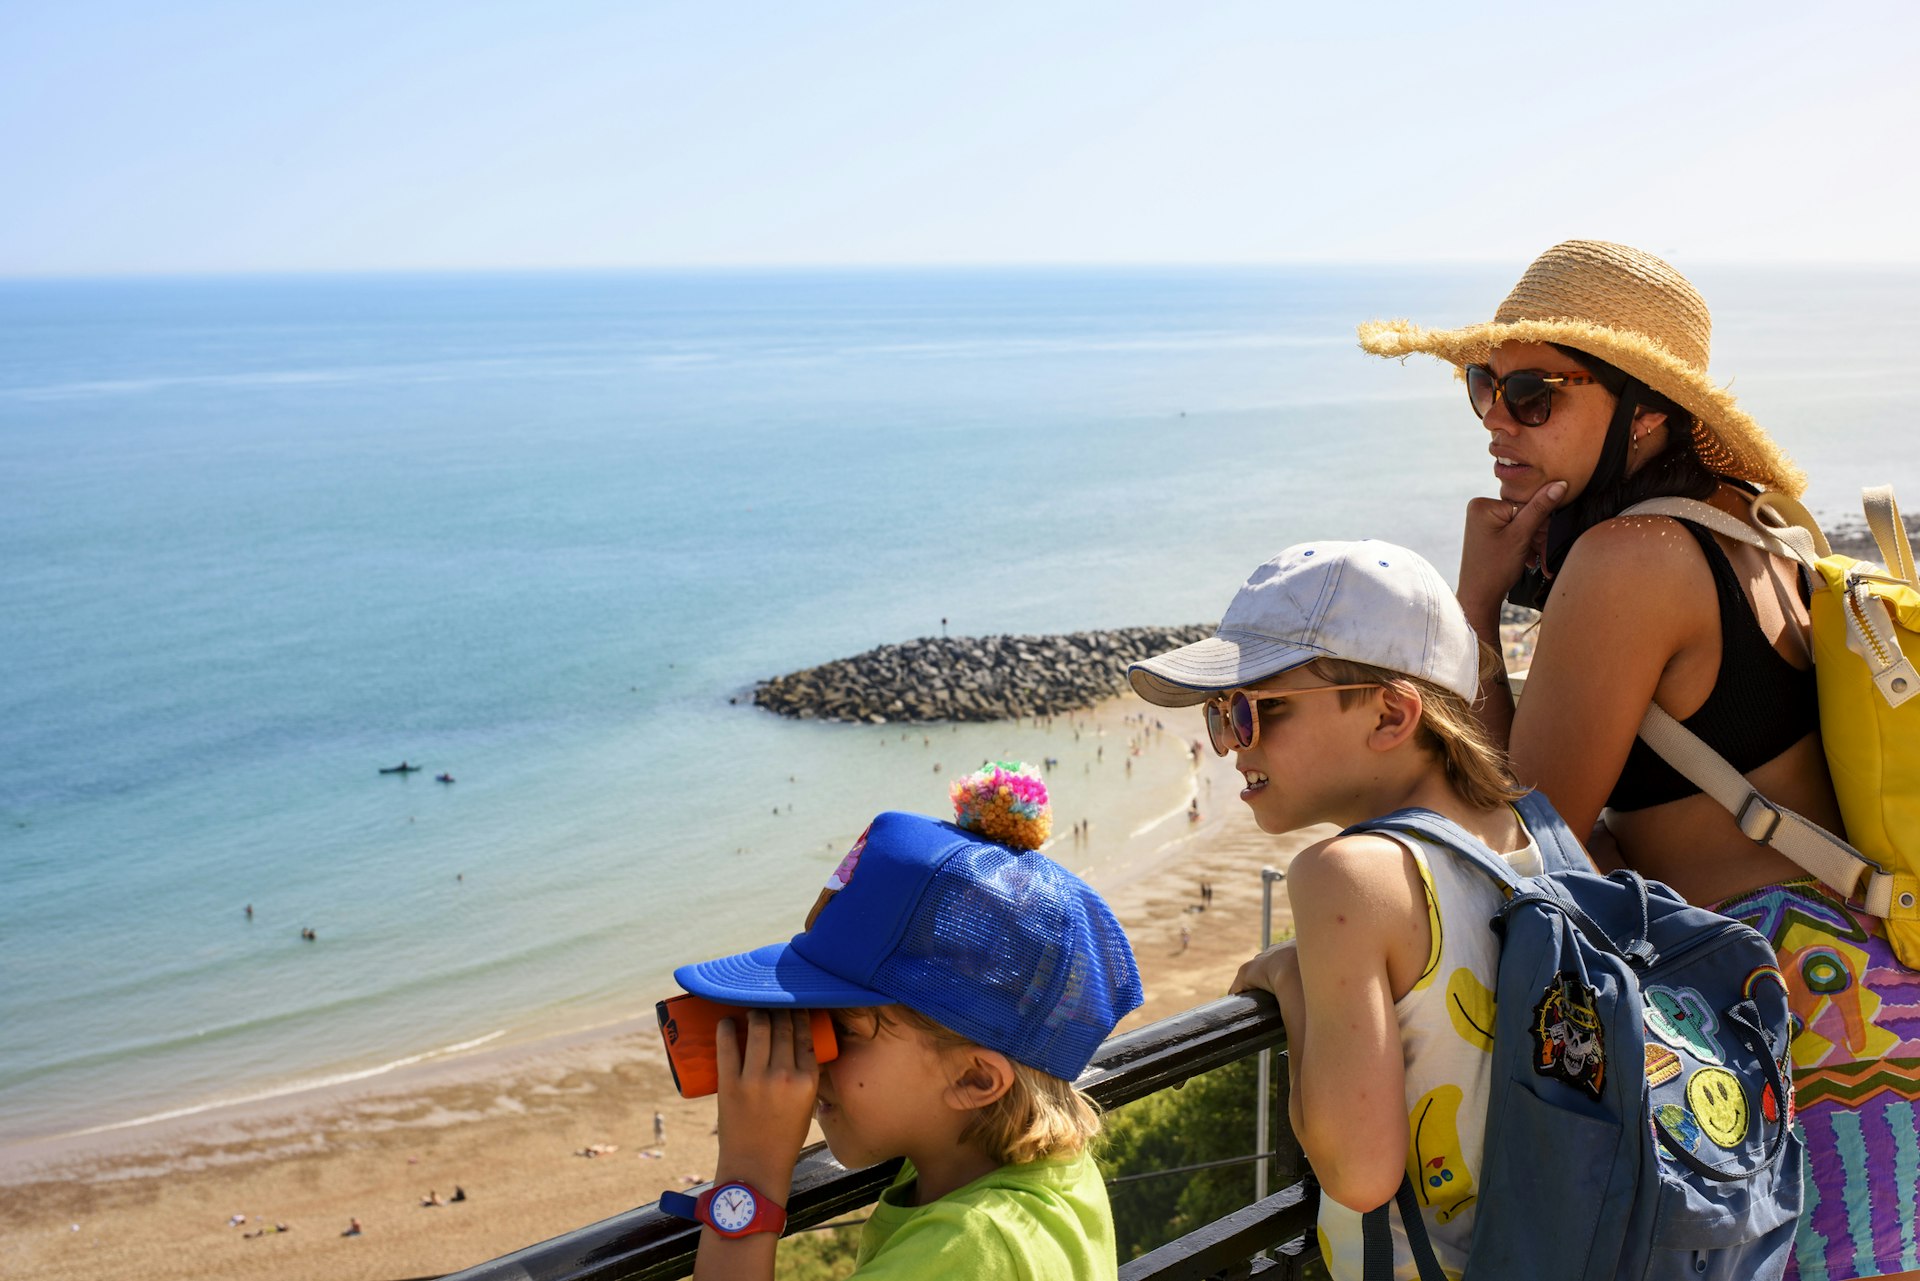 Mother and children stand on a viewpoint above a sandy beach on a sunny day